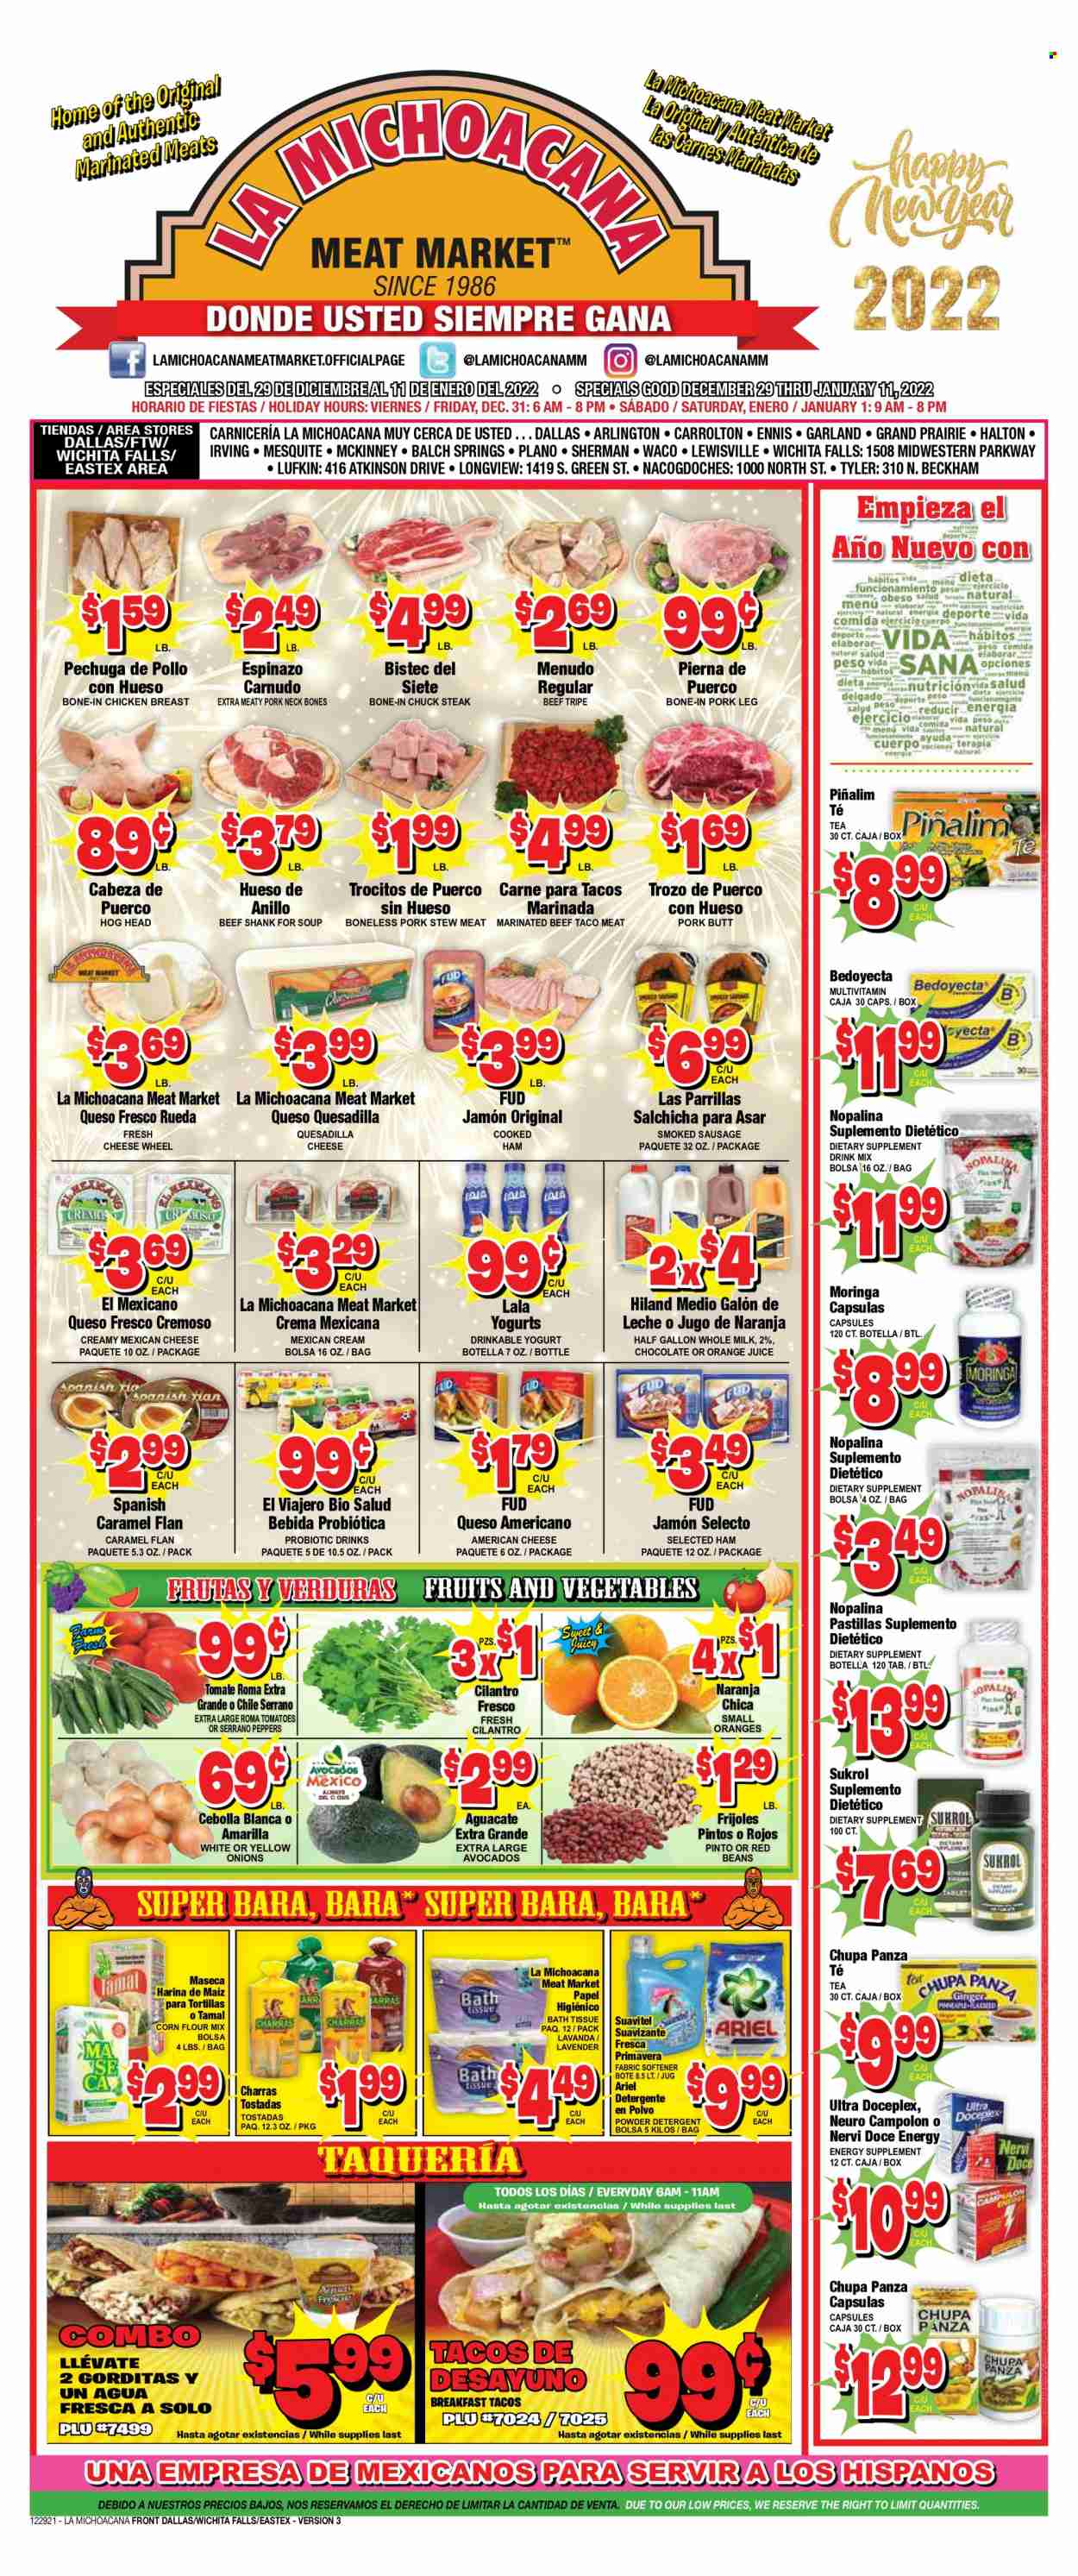 thumbnail - La Michoacana Meat Market Flyer - 12/29/2021 - 01/11/2022 - Sales products - stew meat, tortillas, tostadas, beans, corn, tomatoes, peppers, avocado, soup, cooked ham, ham, sausage, smoked sausage, american cheese, queso fresco, cheese, yoghurt, milk, chocolate, corn flour, red beans, cilantro, caramel, orange juice, juice, soft drink, tea, chicken breasts, beef meat, beef shank, beef tripe, steak, chuck steak, marinated beef, pork meat, pork leg, bath tissue, detergent, fabric softener, Ariel, bag. Page 1.